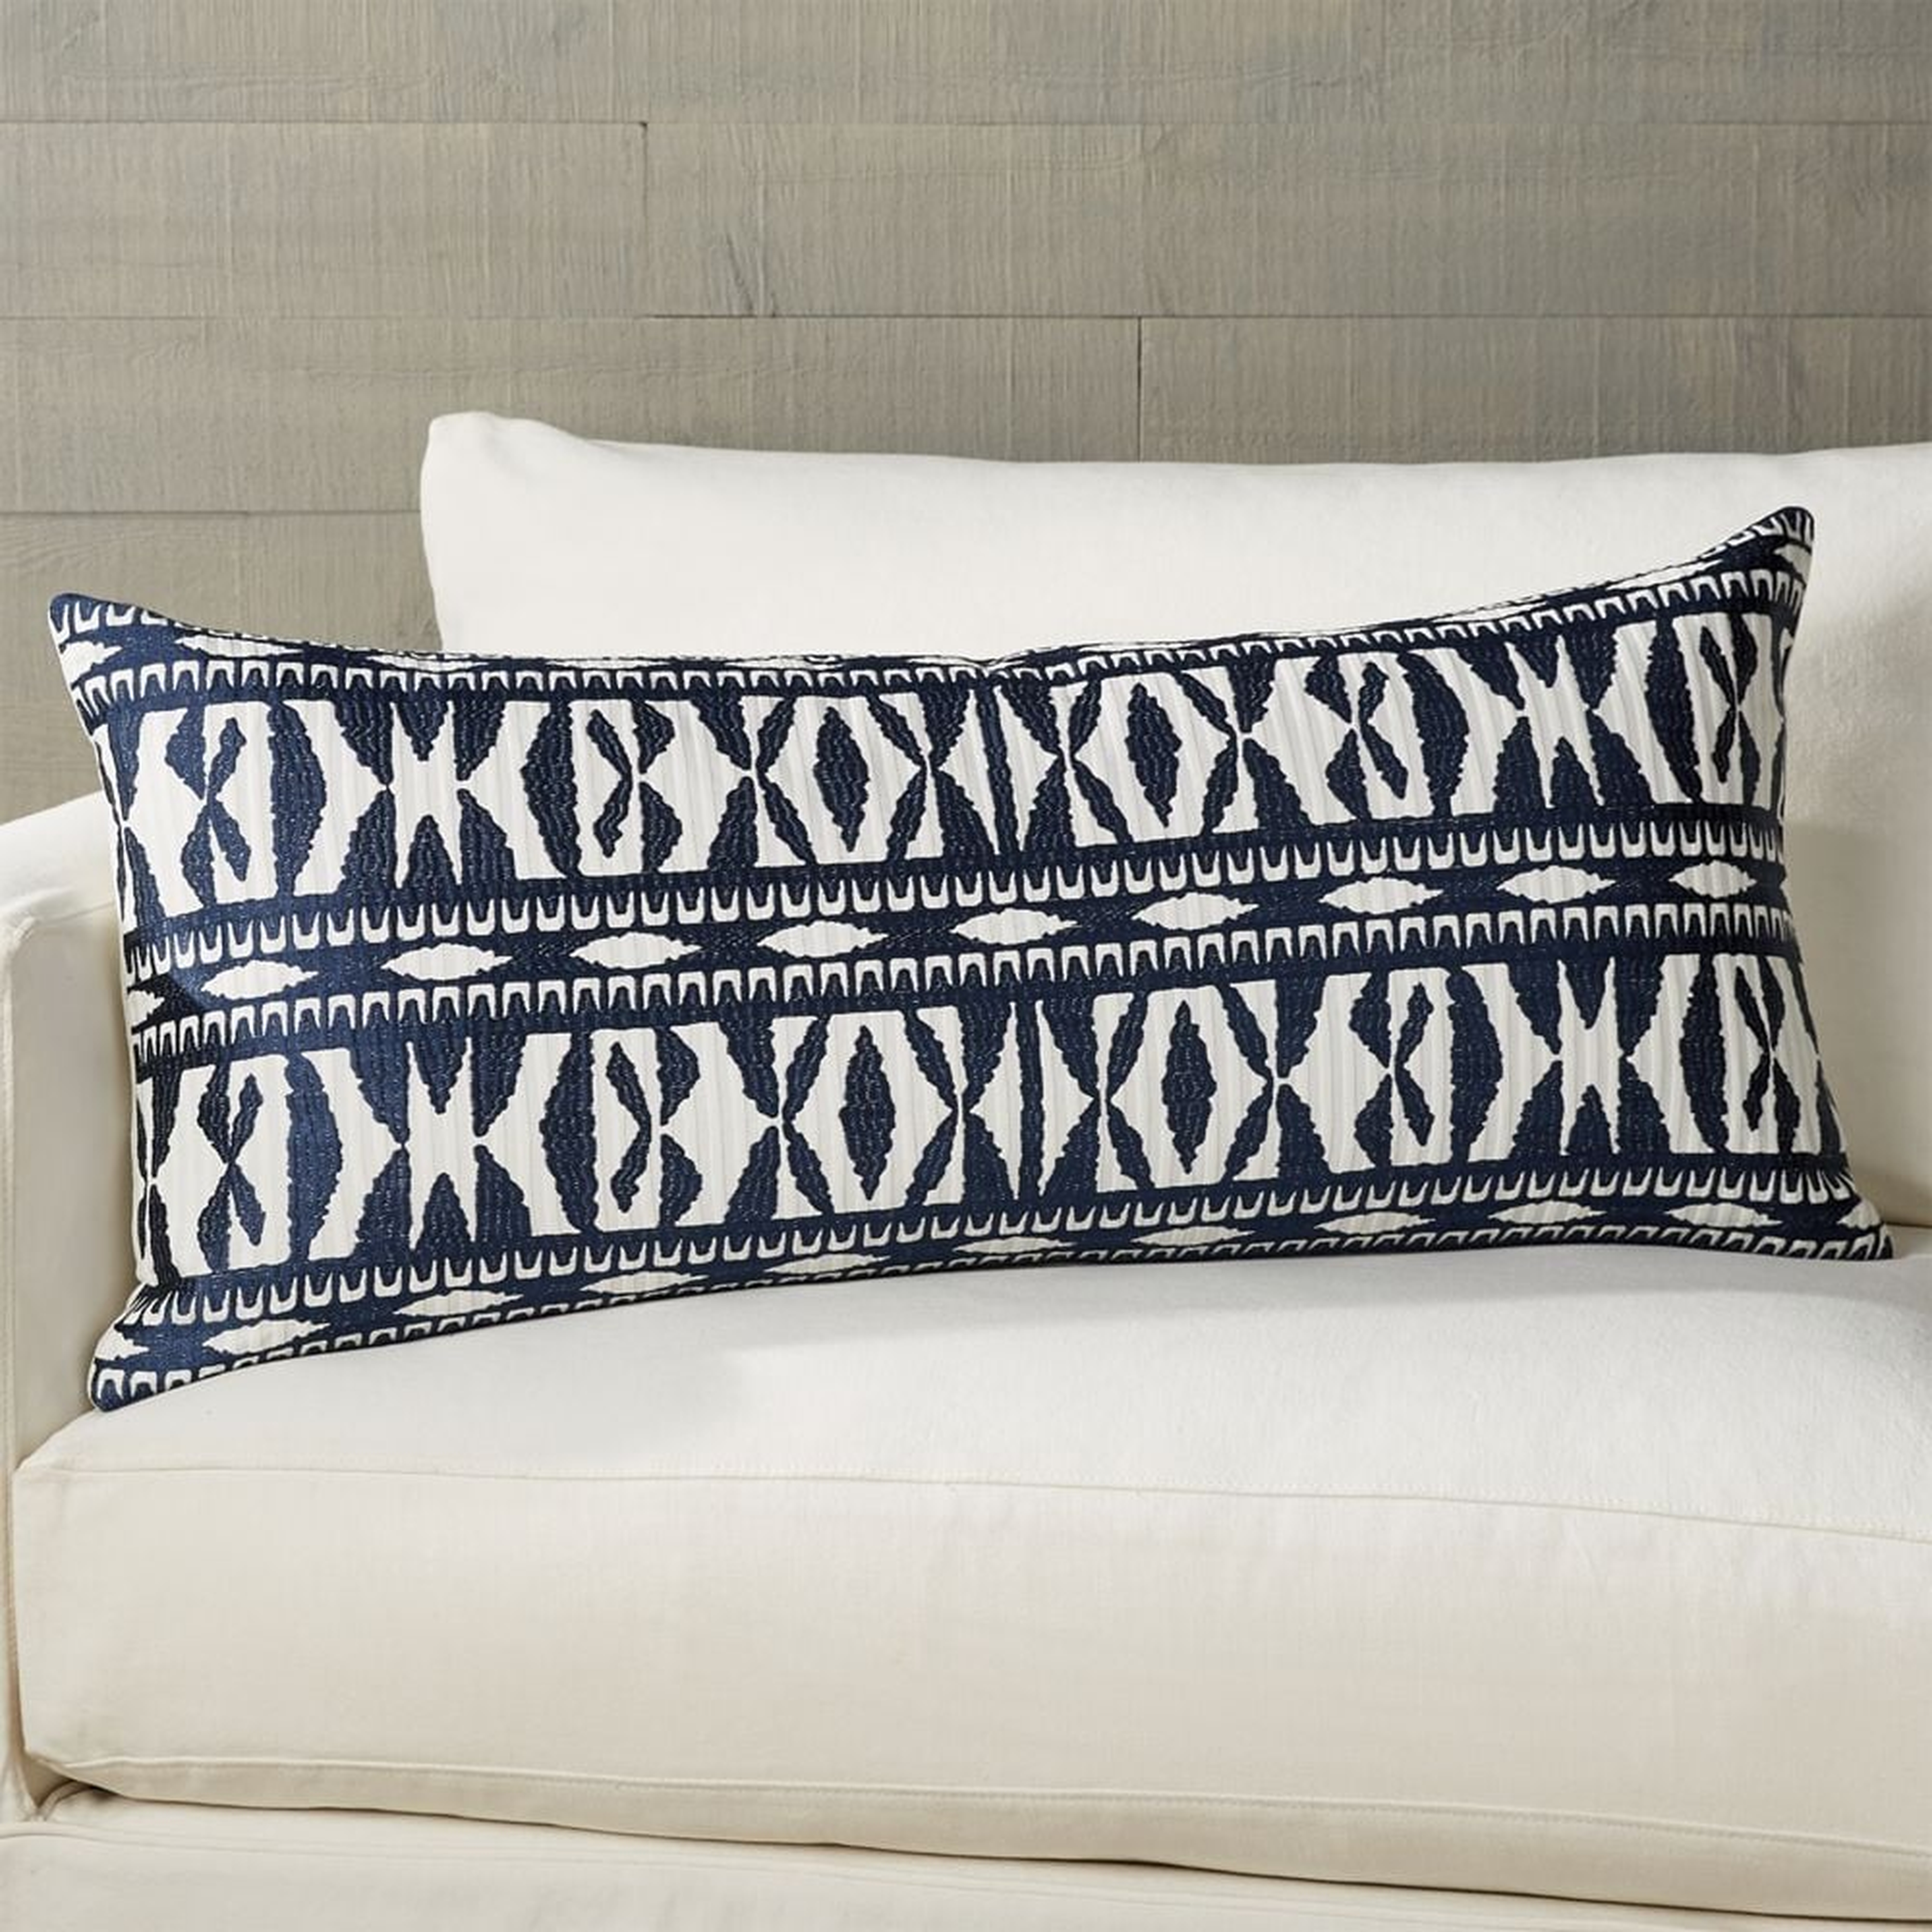 Vercillo Blue Patterned Lumbar Pillow 36"x16" - Crate and Barrel